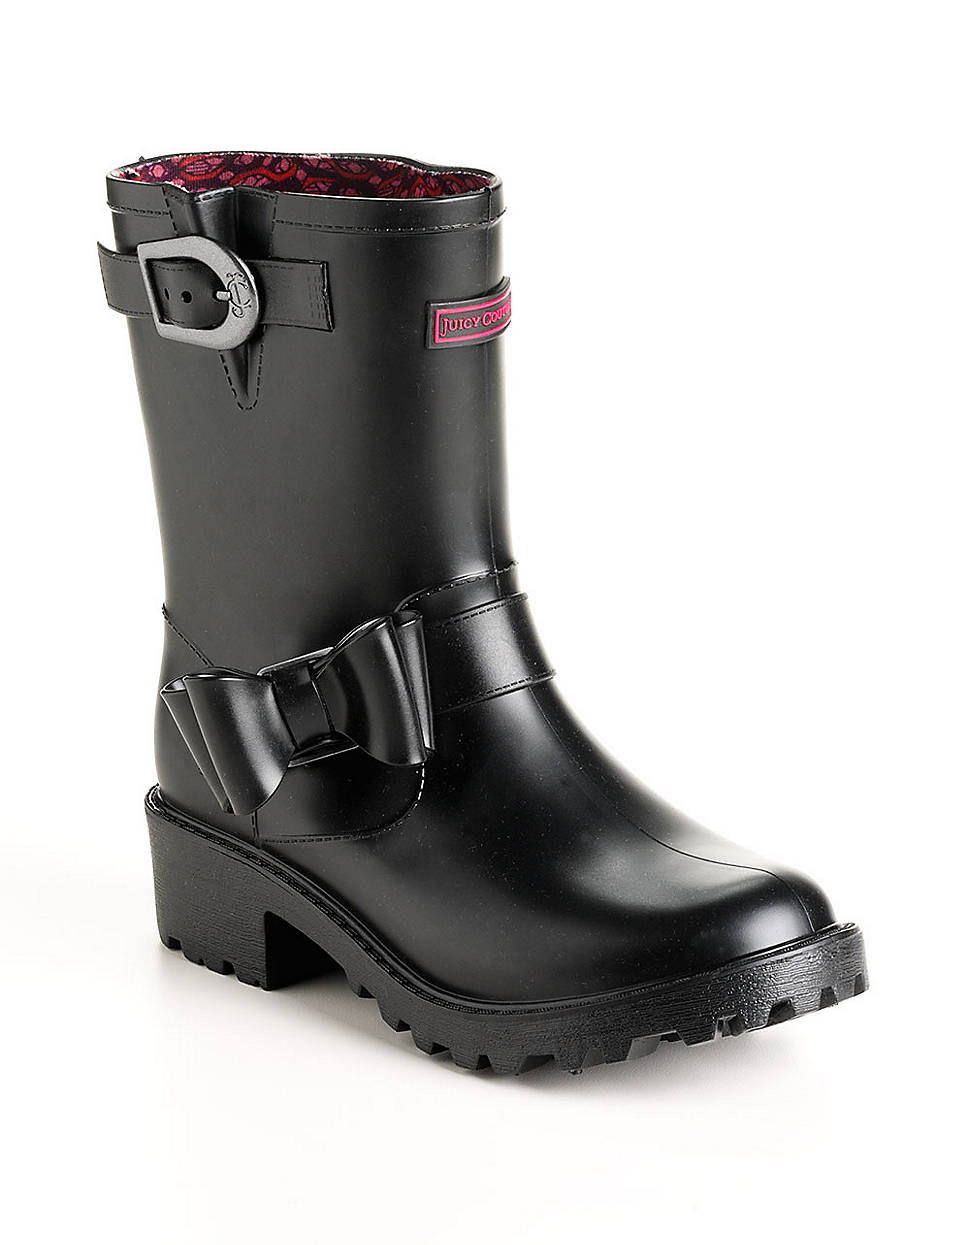 Juicy Couture Giselle Rain Boots in Black Lyst